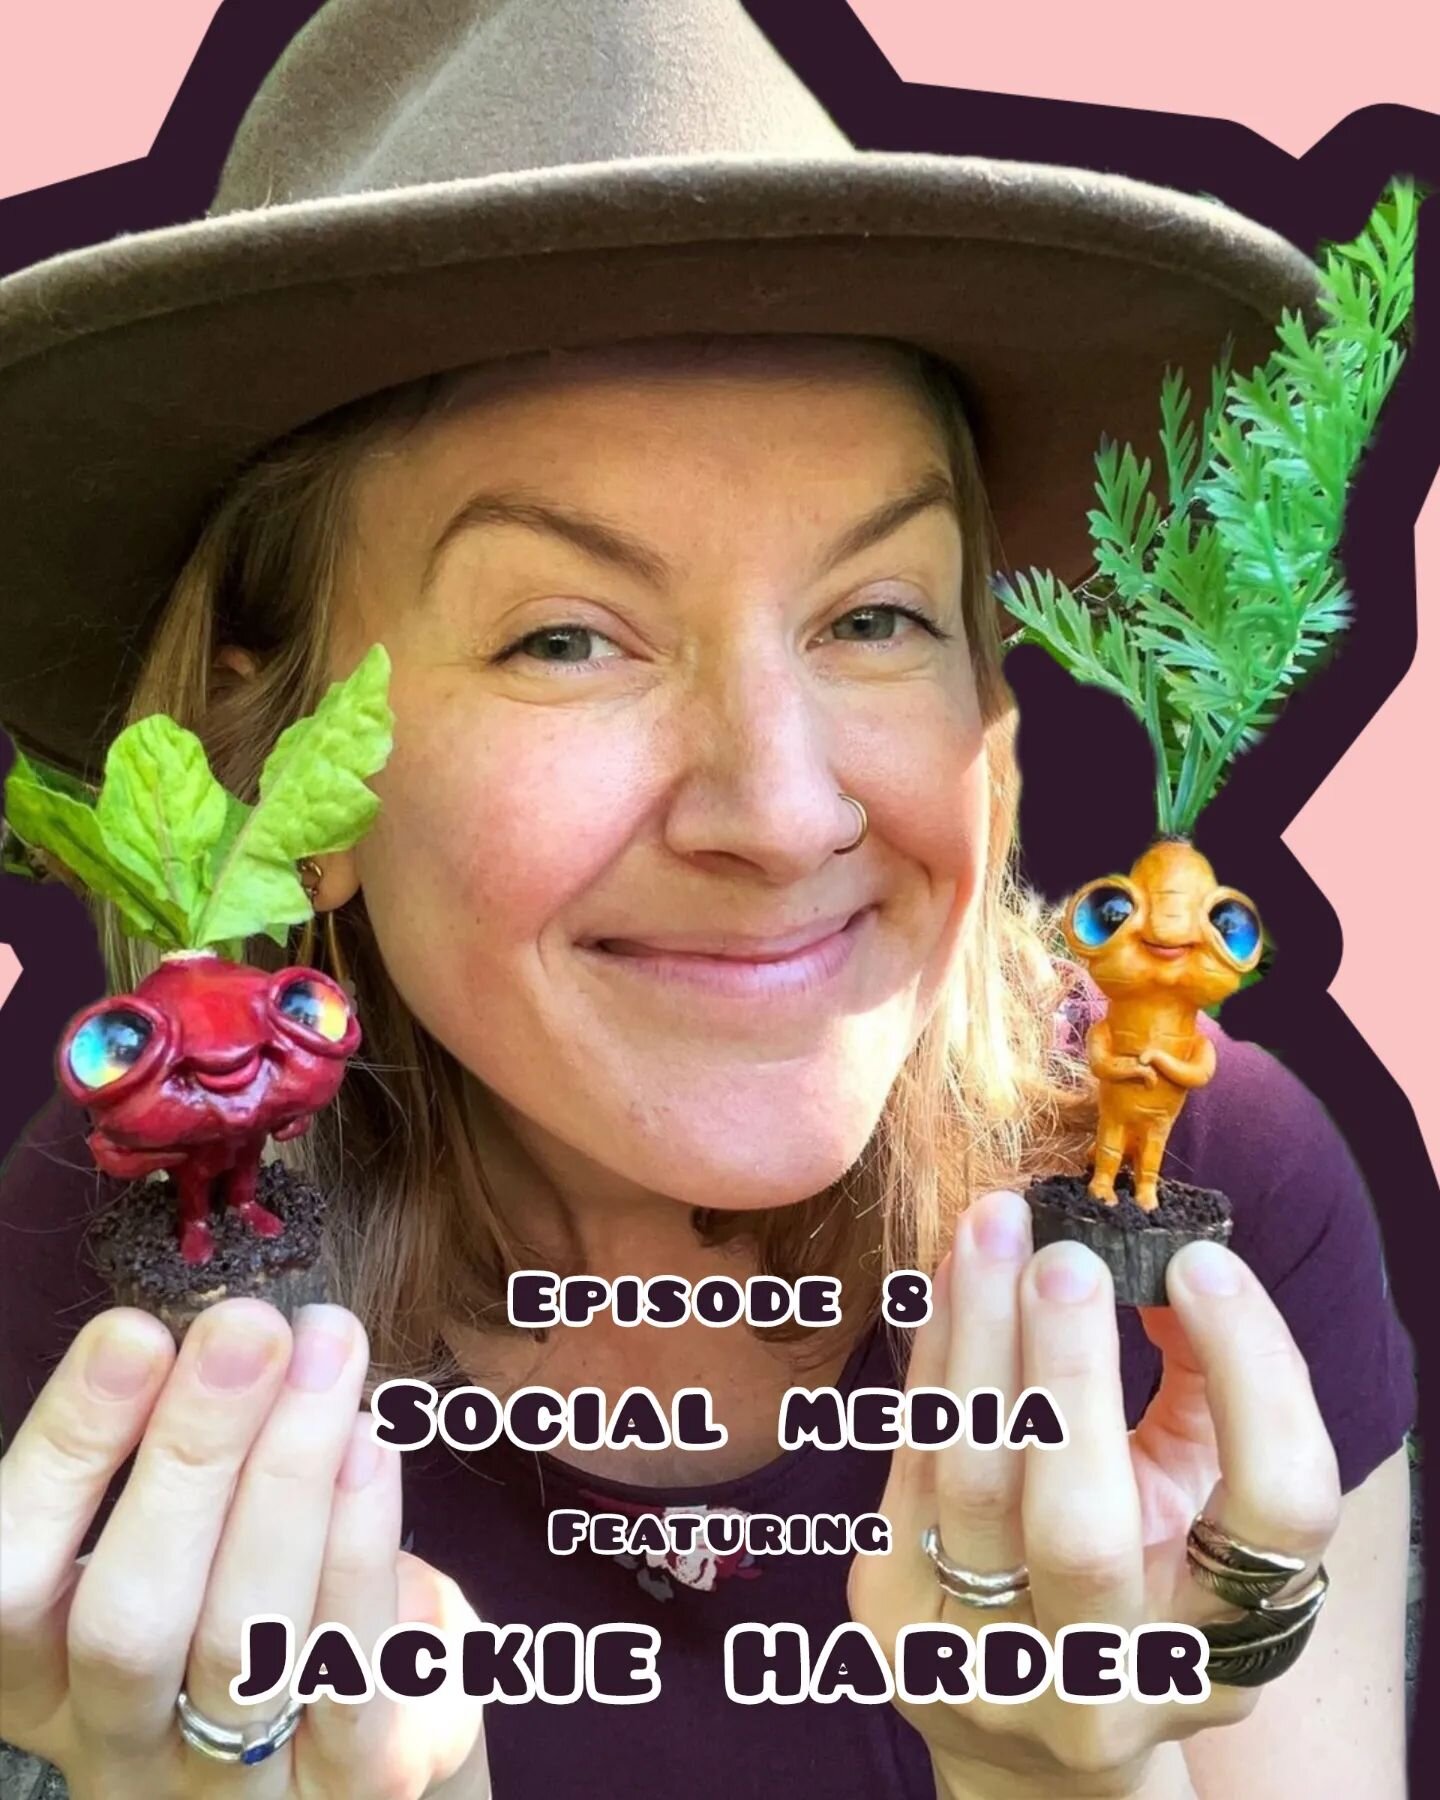 New episode is live!! Social media featuring @jackieharderart 

We dive into the catch 22 of social media. How it plays an important role in advertising for our business, making friends and how it can play with our mental health. We spoke about our v